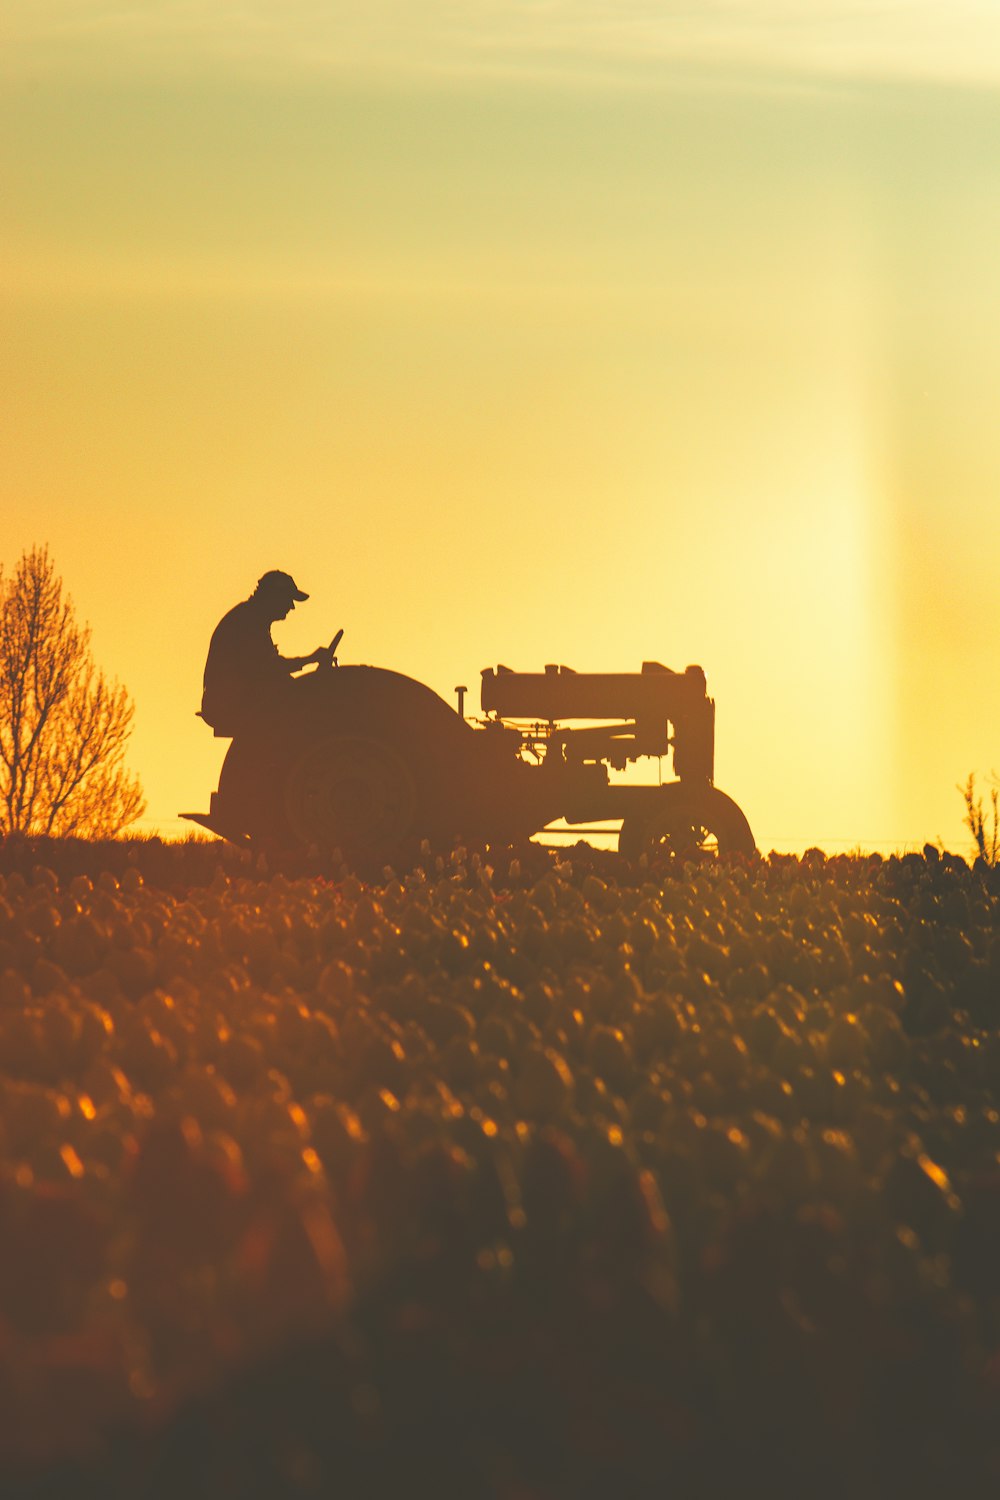 a person riding a tractor in a field at sunset